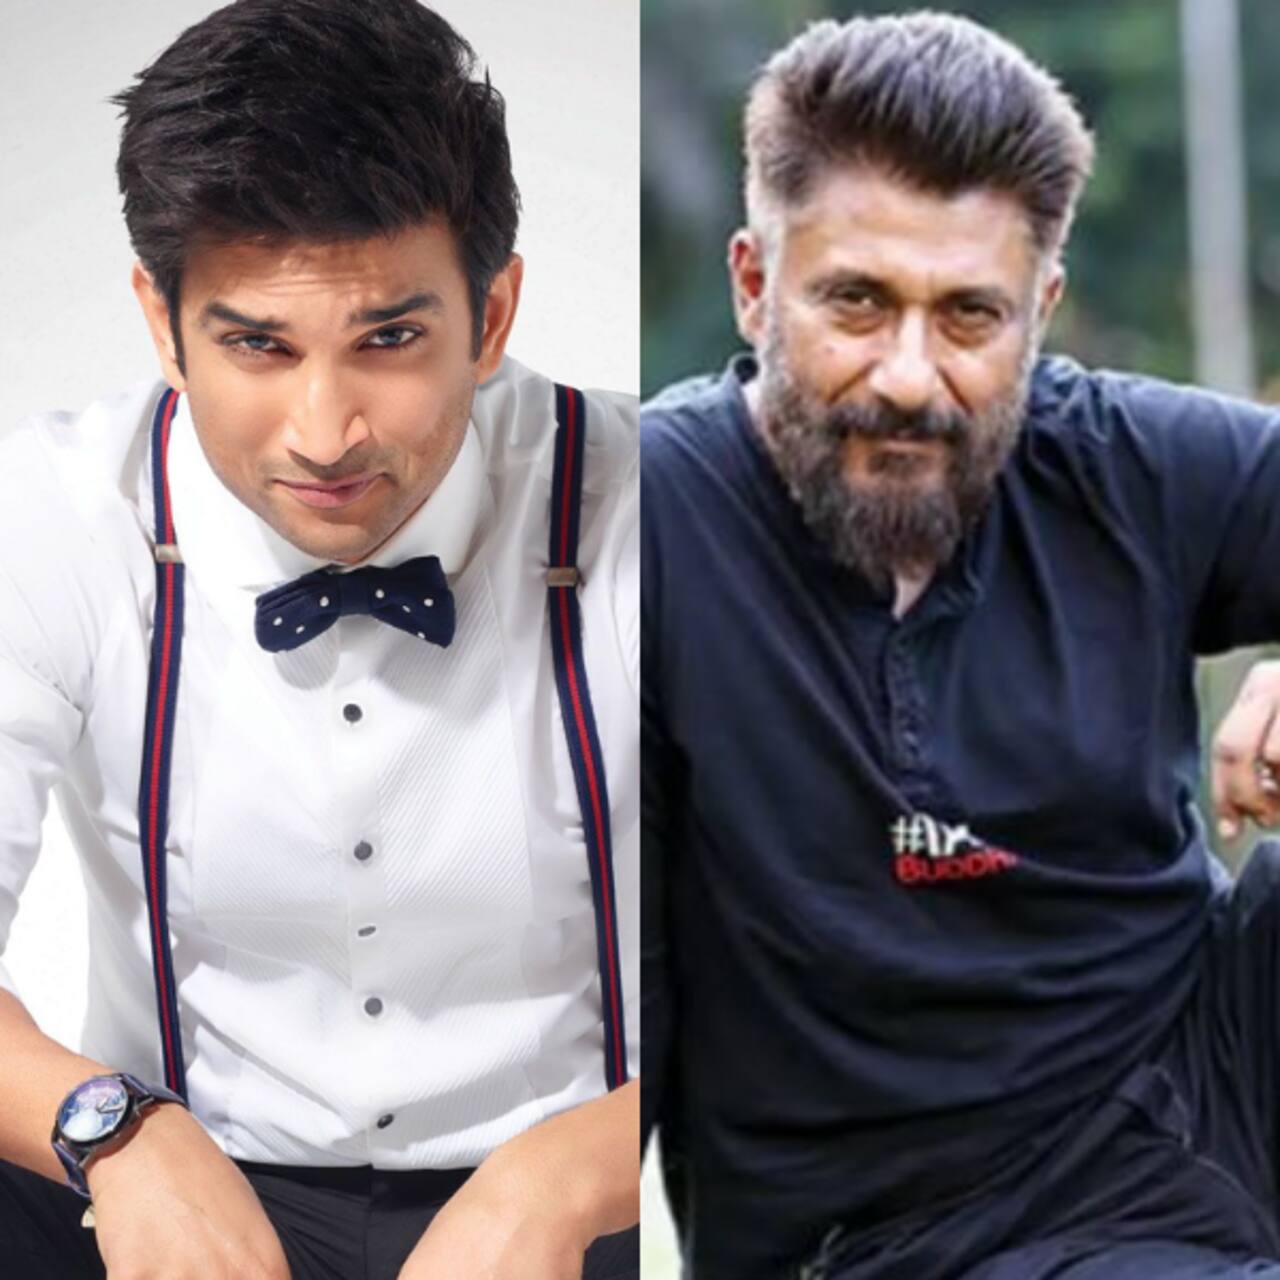 Trending Entertainment News Today: Vivek Agnihotri takes a jibe at Besharam Rang, Sushant Singh Rajput eyes were punched claims hospital staff and more  